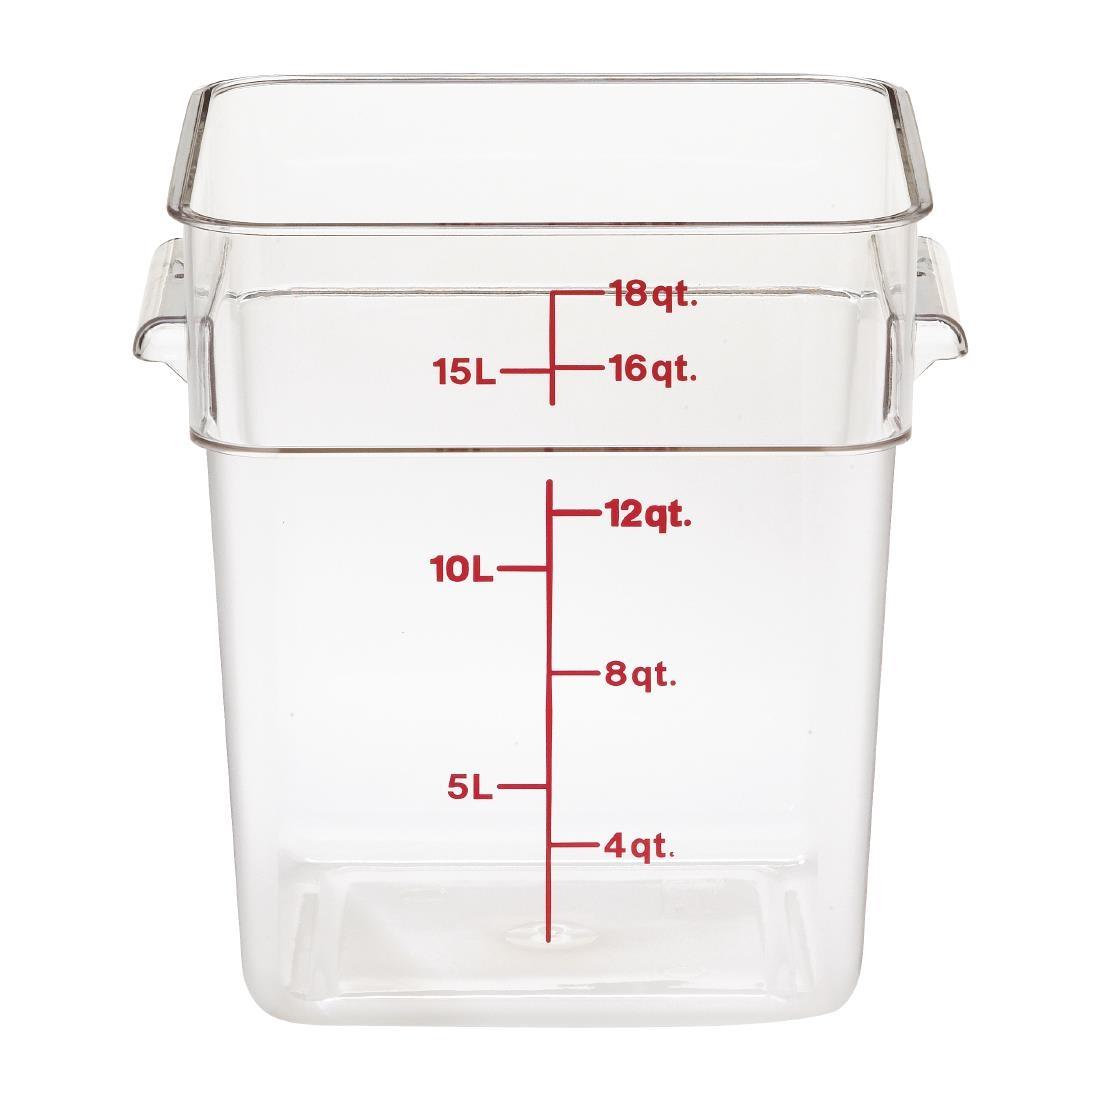 Cambro Square Polycarbonate Food Storage Container 17.2 Ltr - DT198  - 1